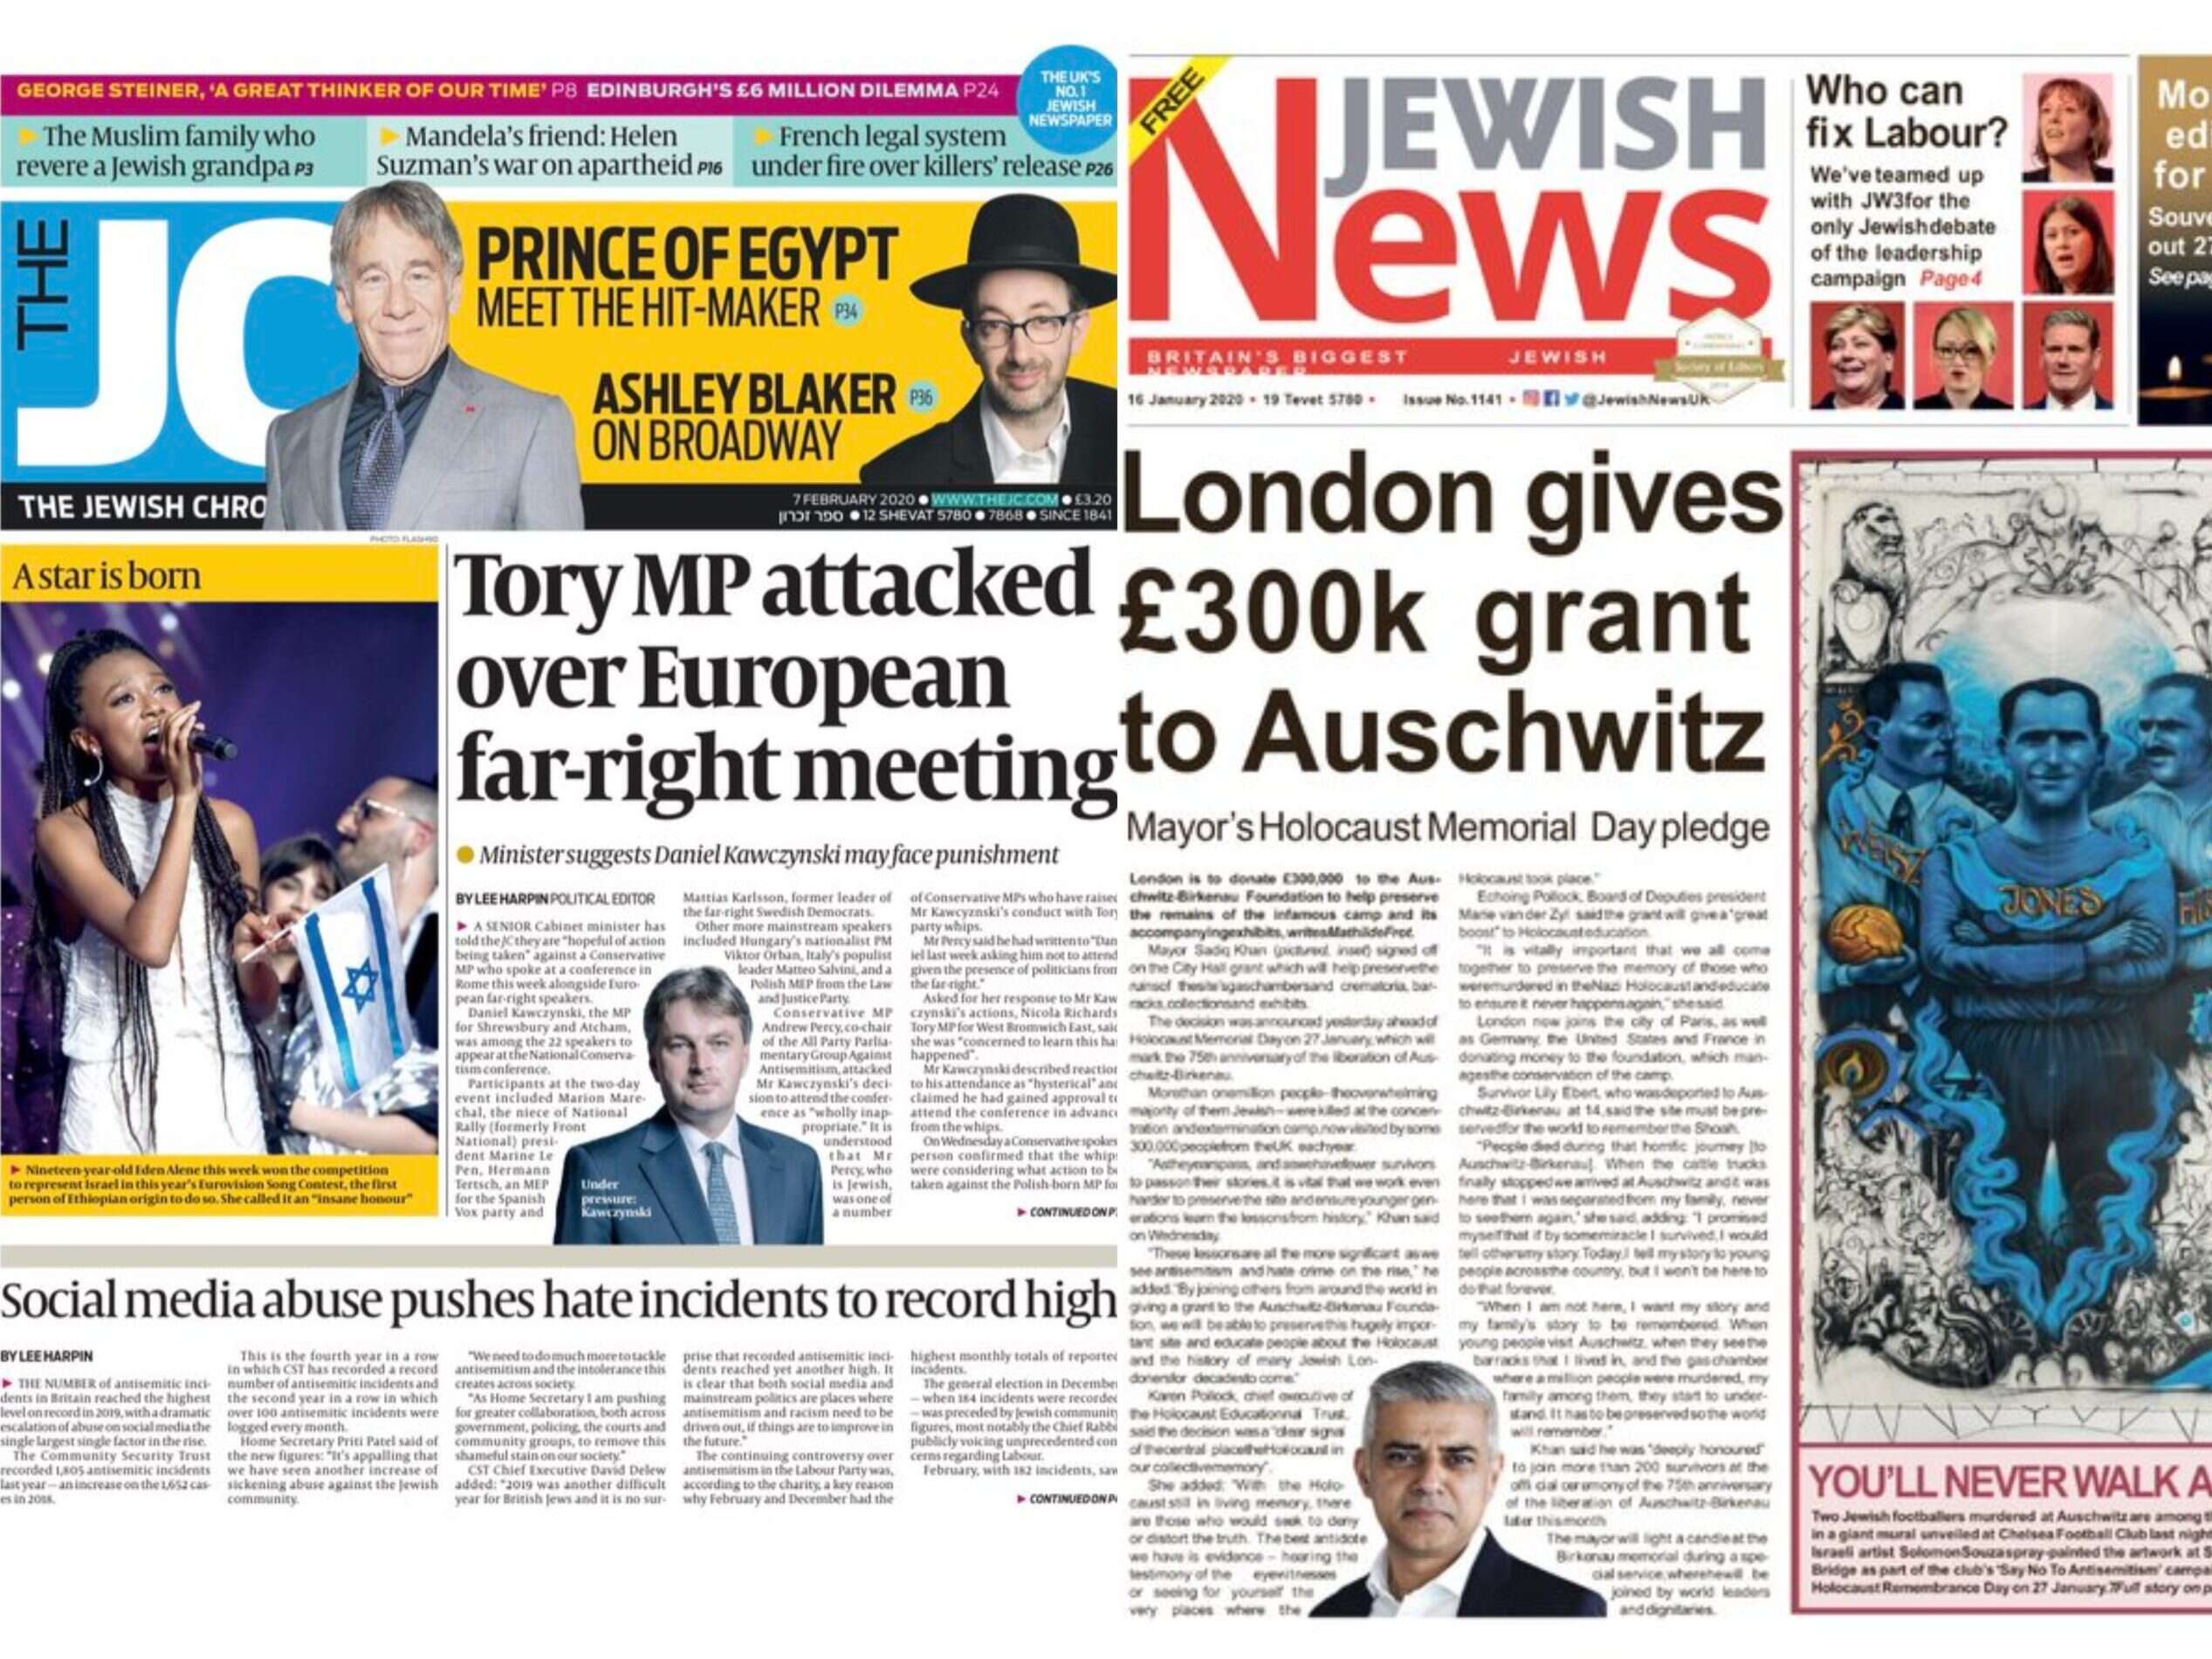 Jewish Chronicle and Jewish News agree to merge news operations to 'secure financial future'